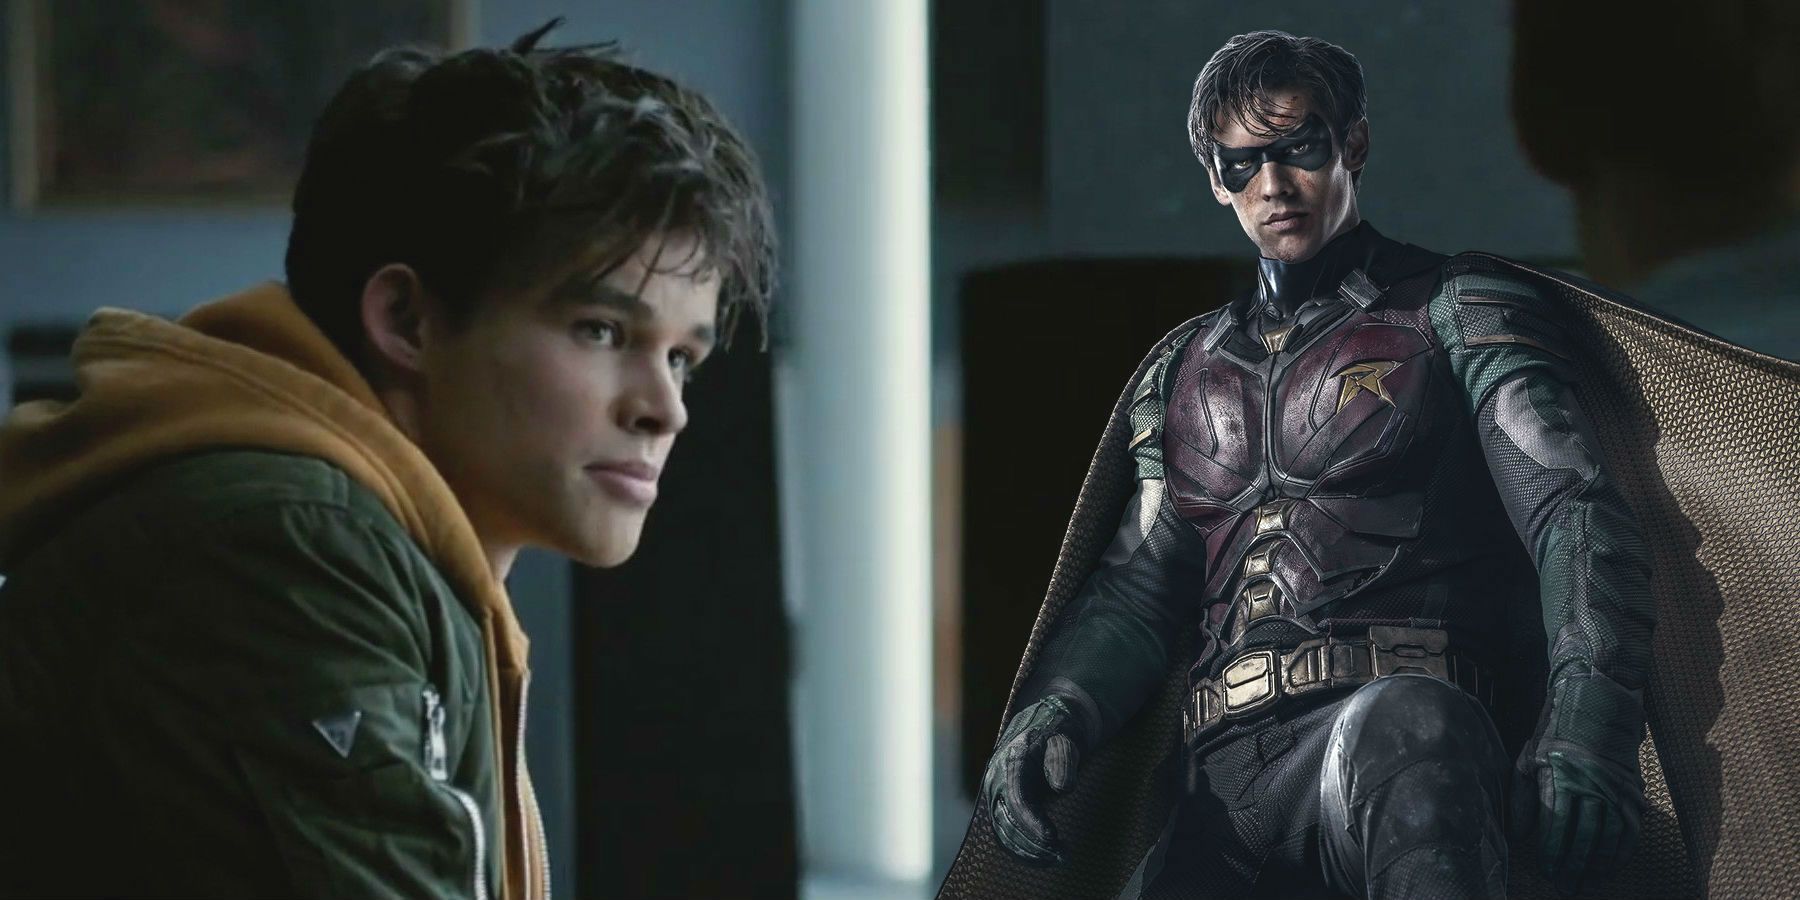 Curran Walters as Jason Todd and Brenton Thwaites as Robin Dick Grayson in Titans